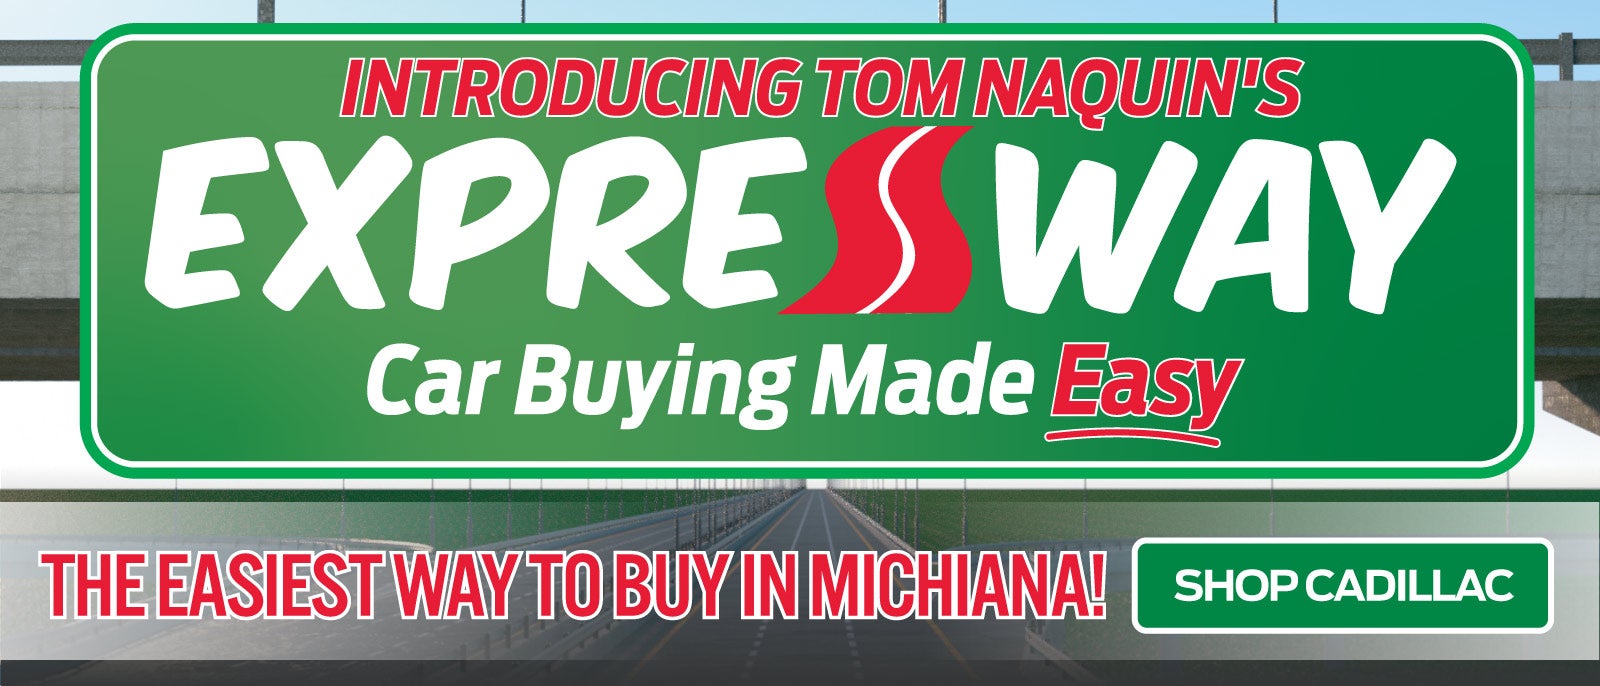 The easiest way to buy in Michiana! Shop Cadillac now